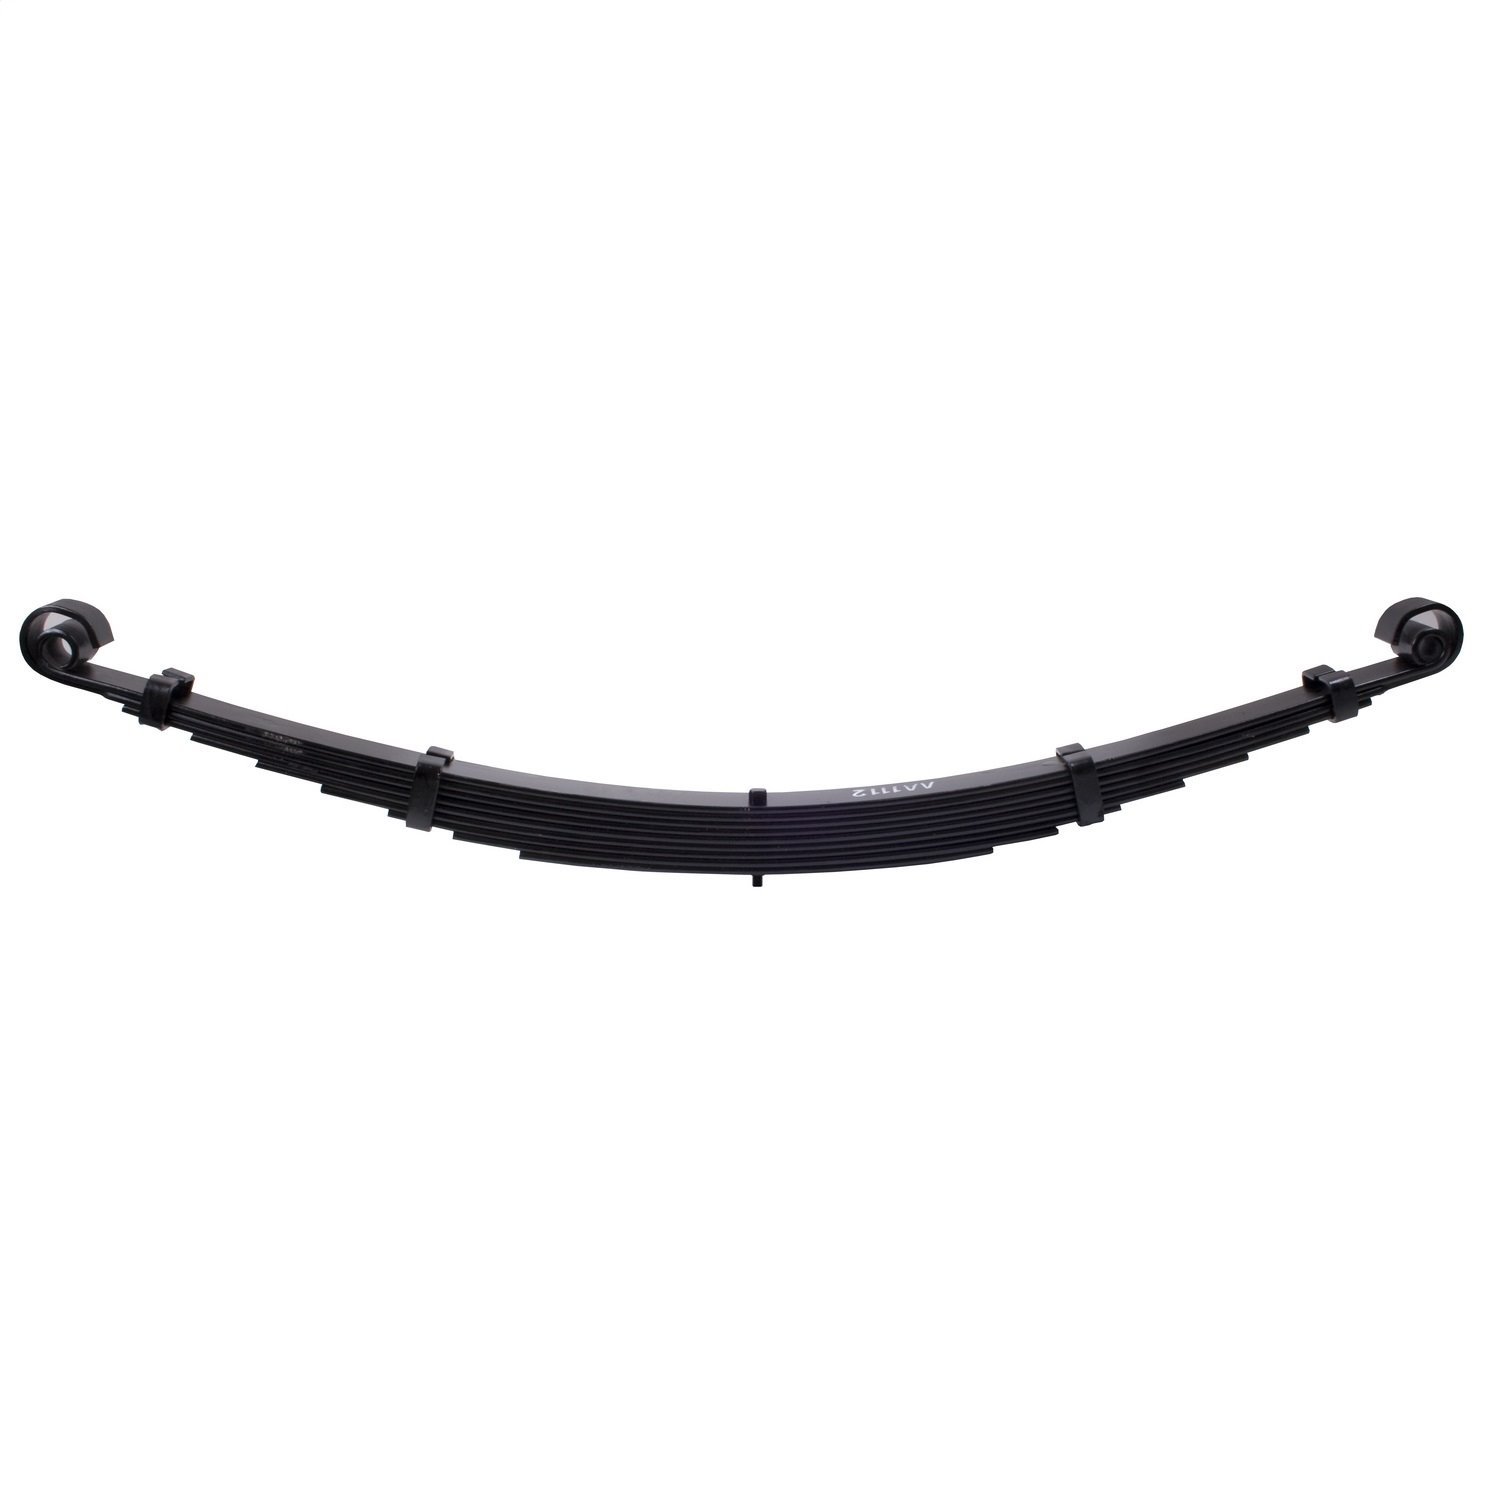 9 leaf replacement rear leaf spring from Omix-ADA, Fits 41-45 Willys MBs 46-49 CJ2A and 49-53 CJ3A.